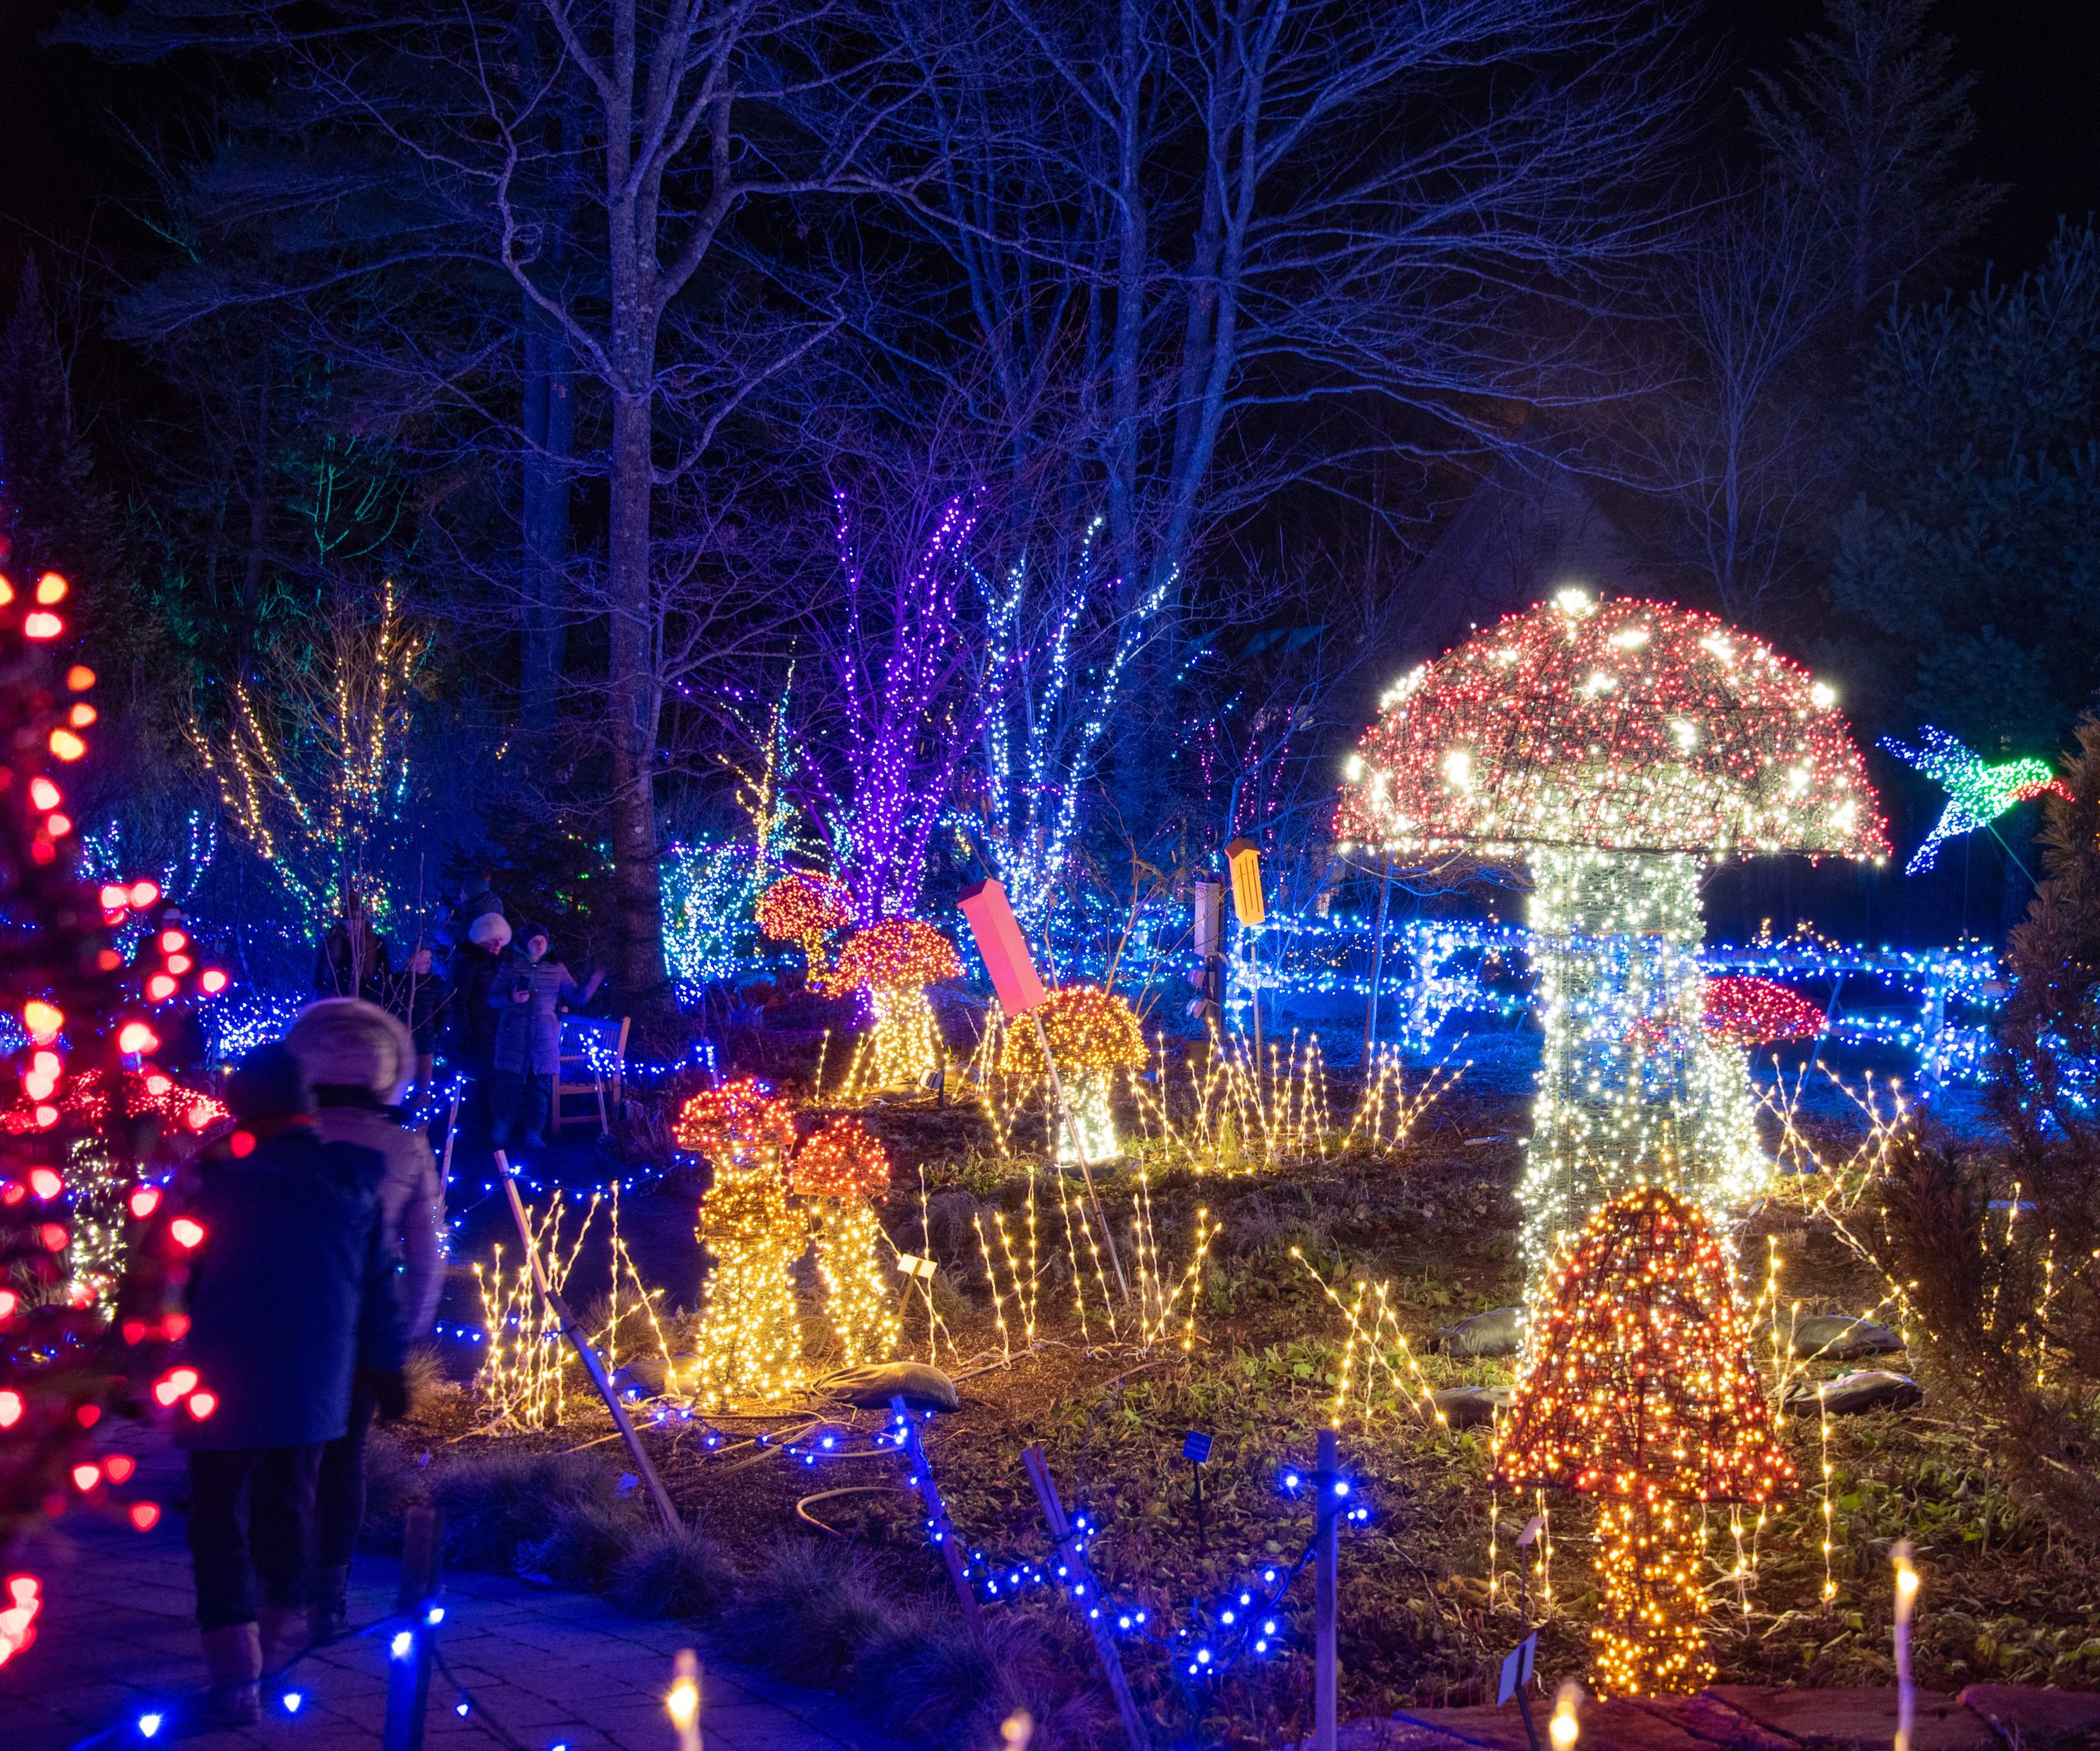 Gardens Aglow – A Dazzling Holiday Scene in Boothbay Harbor, Maine